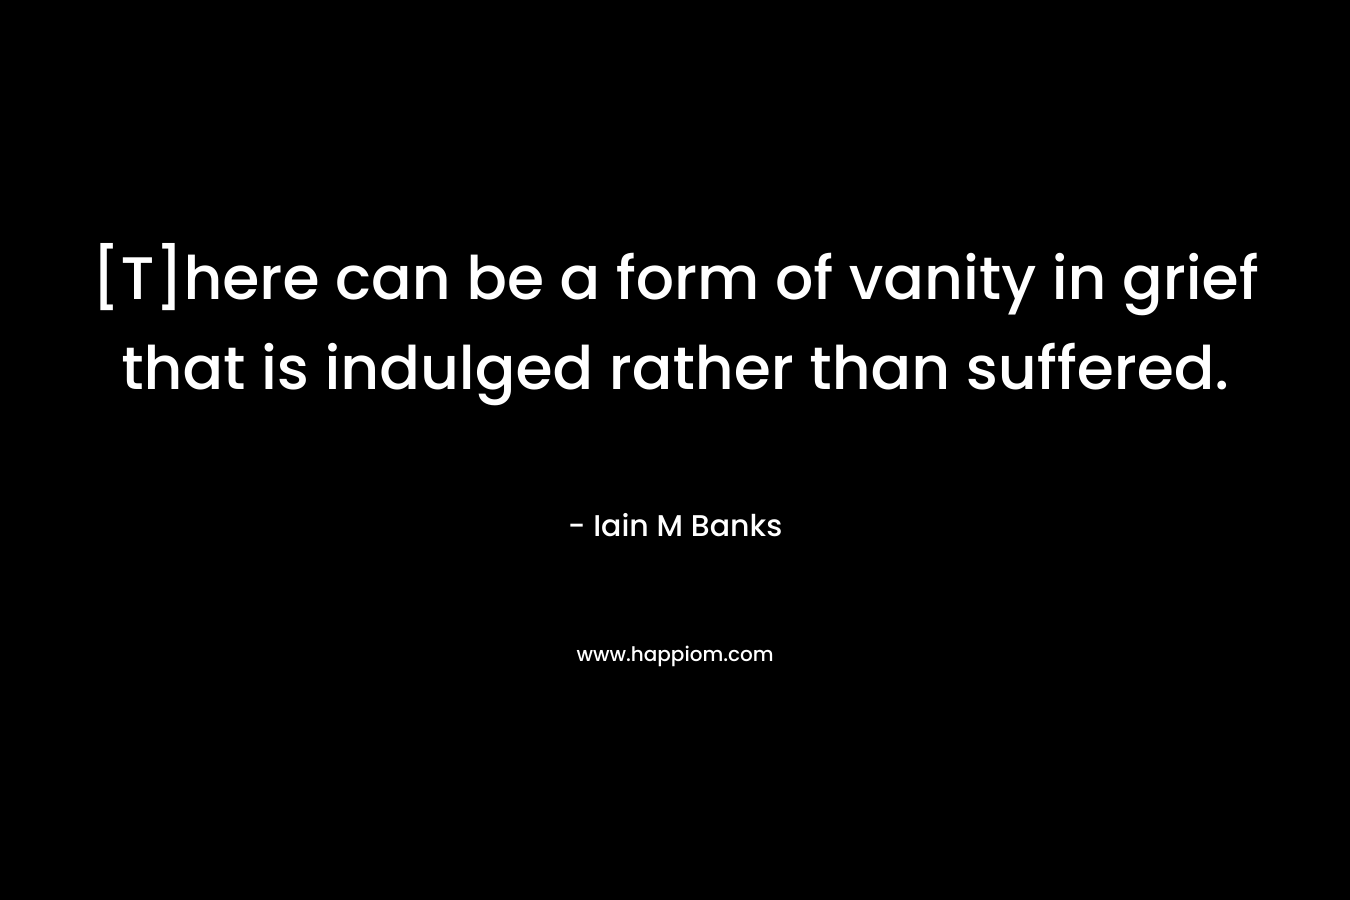 [T]here can be a form of vanity in grief that is indulged rather than suffered. – Iain M Banks